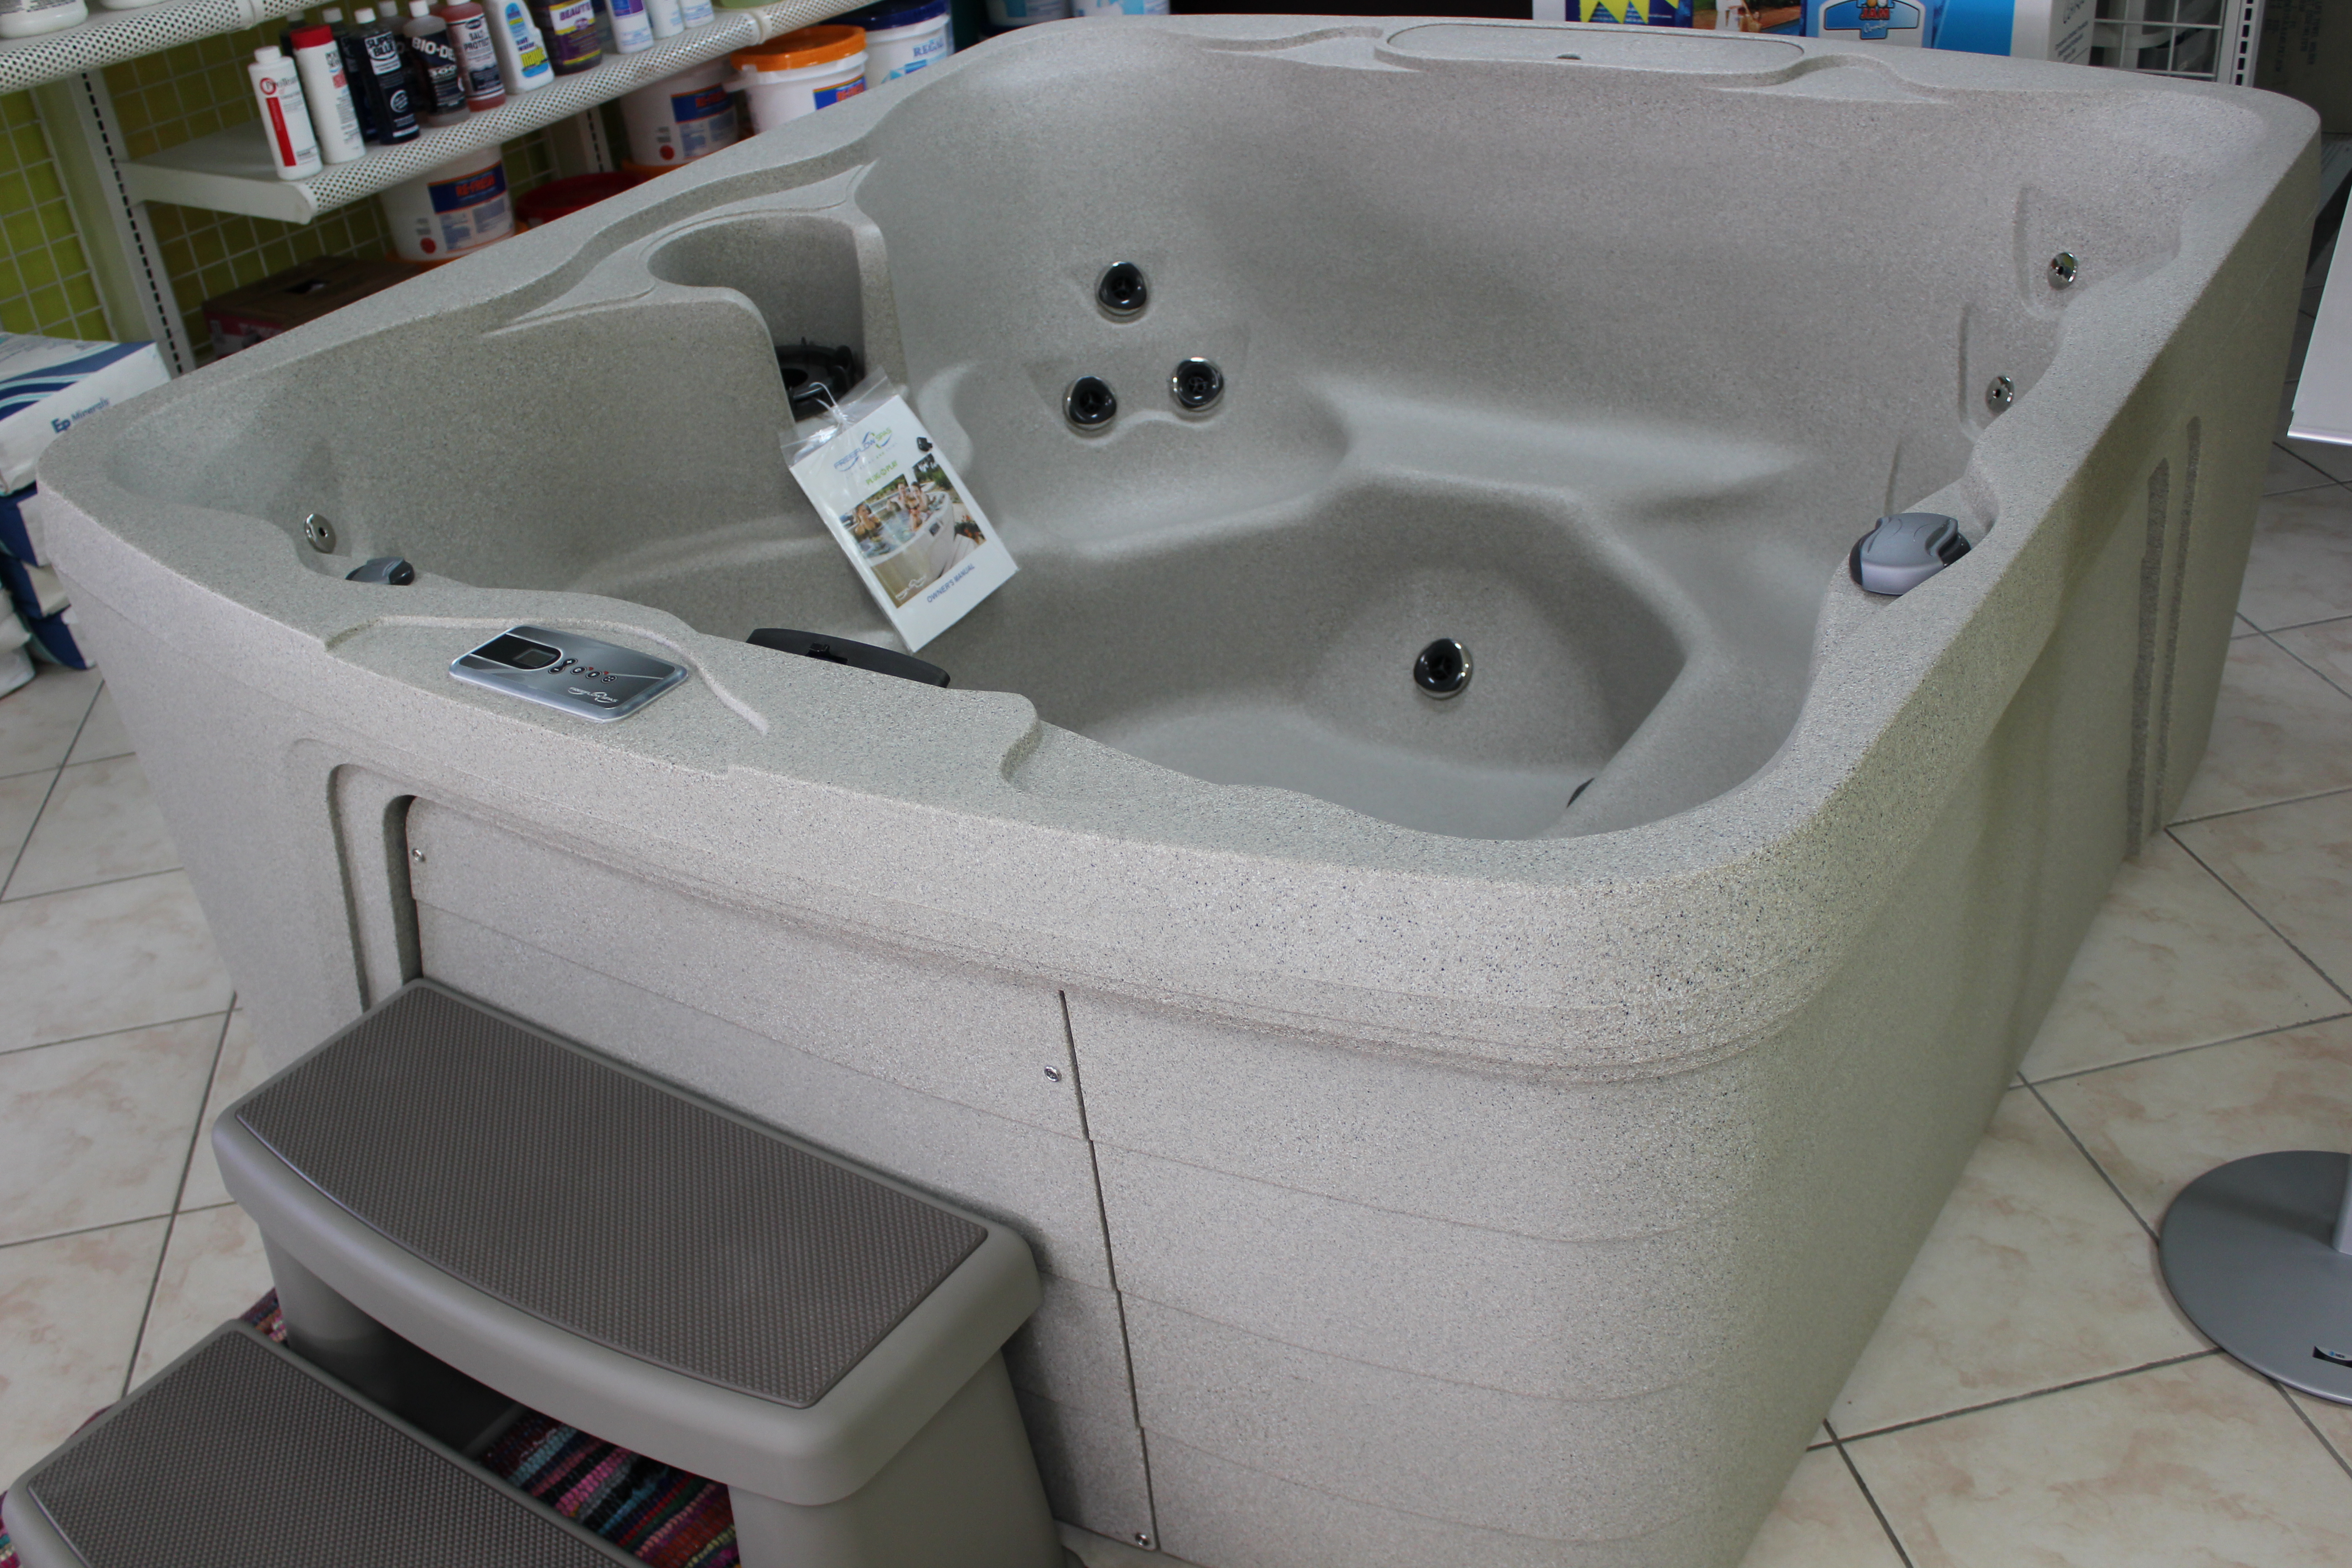 The hot tub four, front view